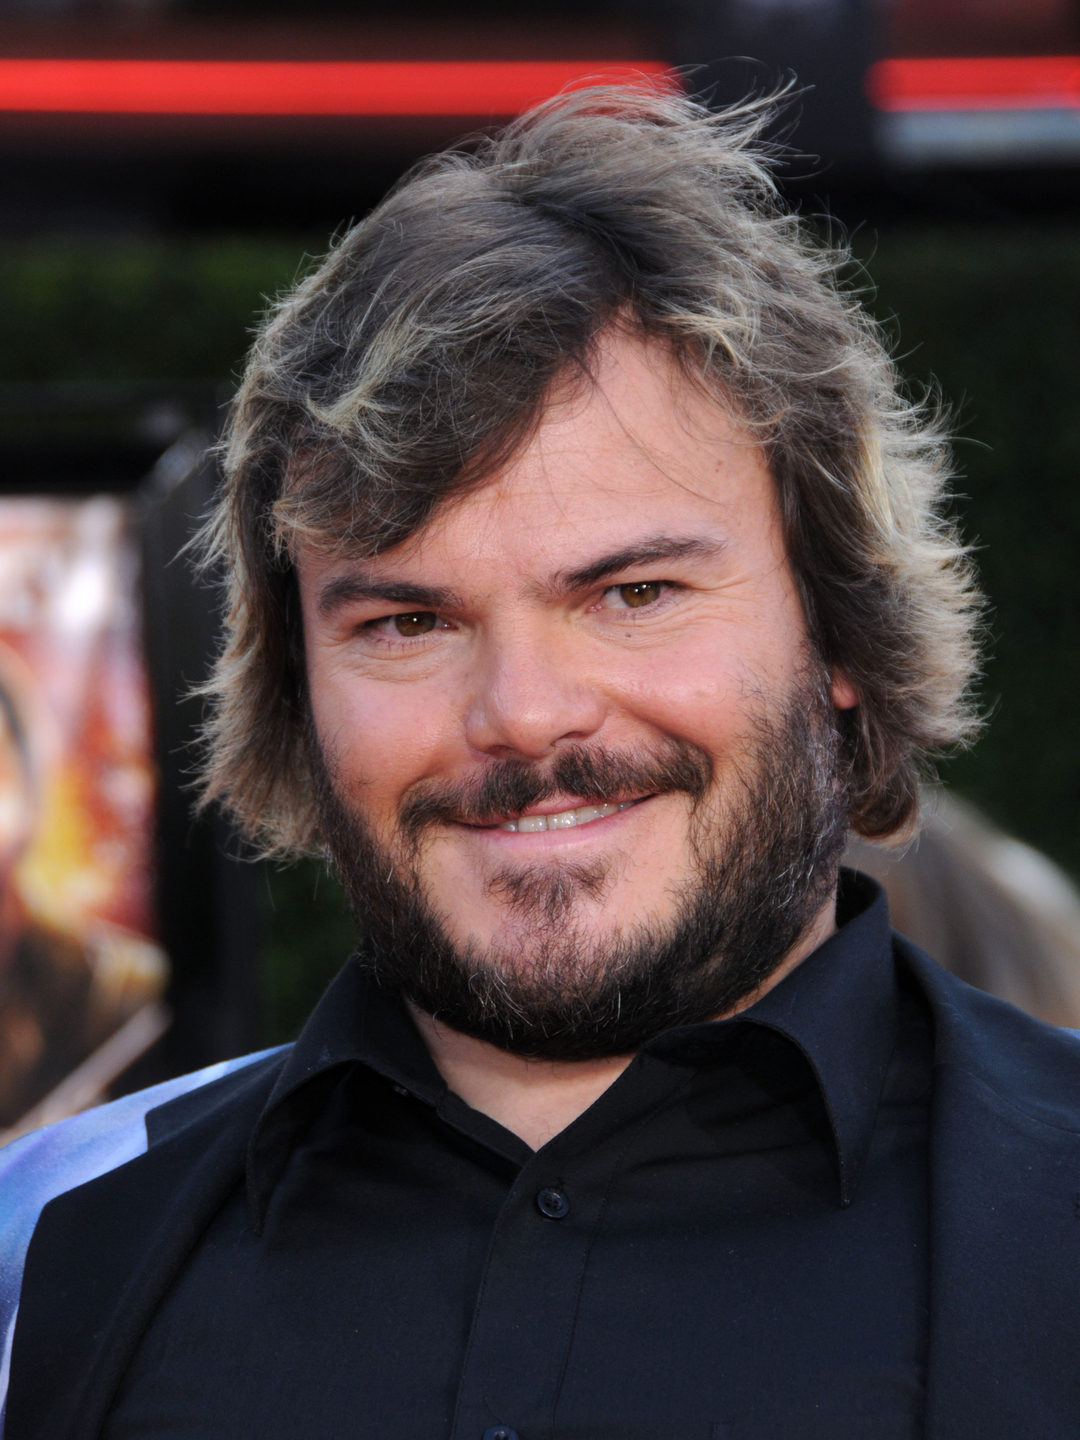 Jack Black who is his father